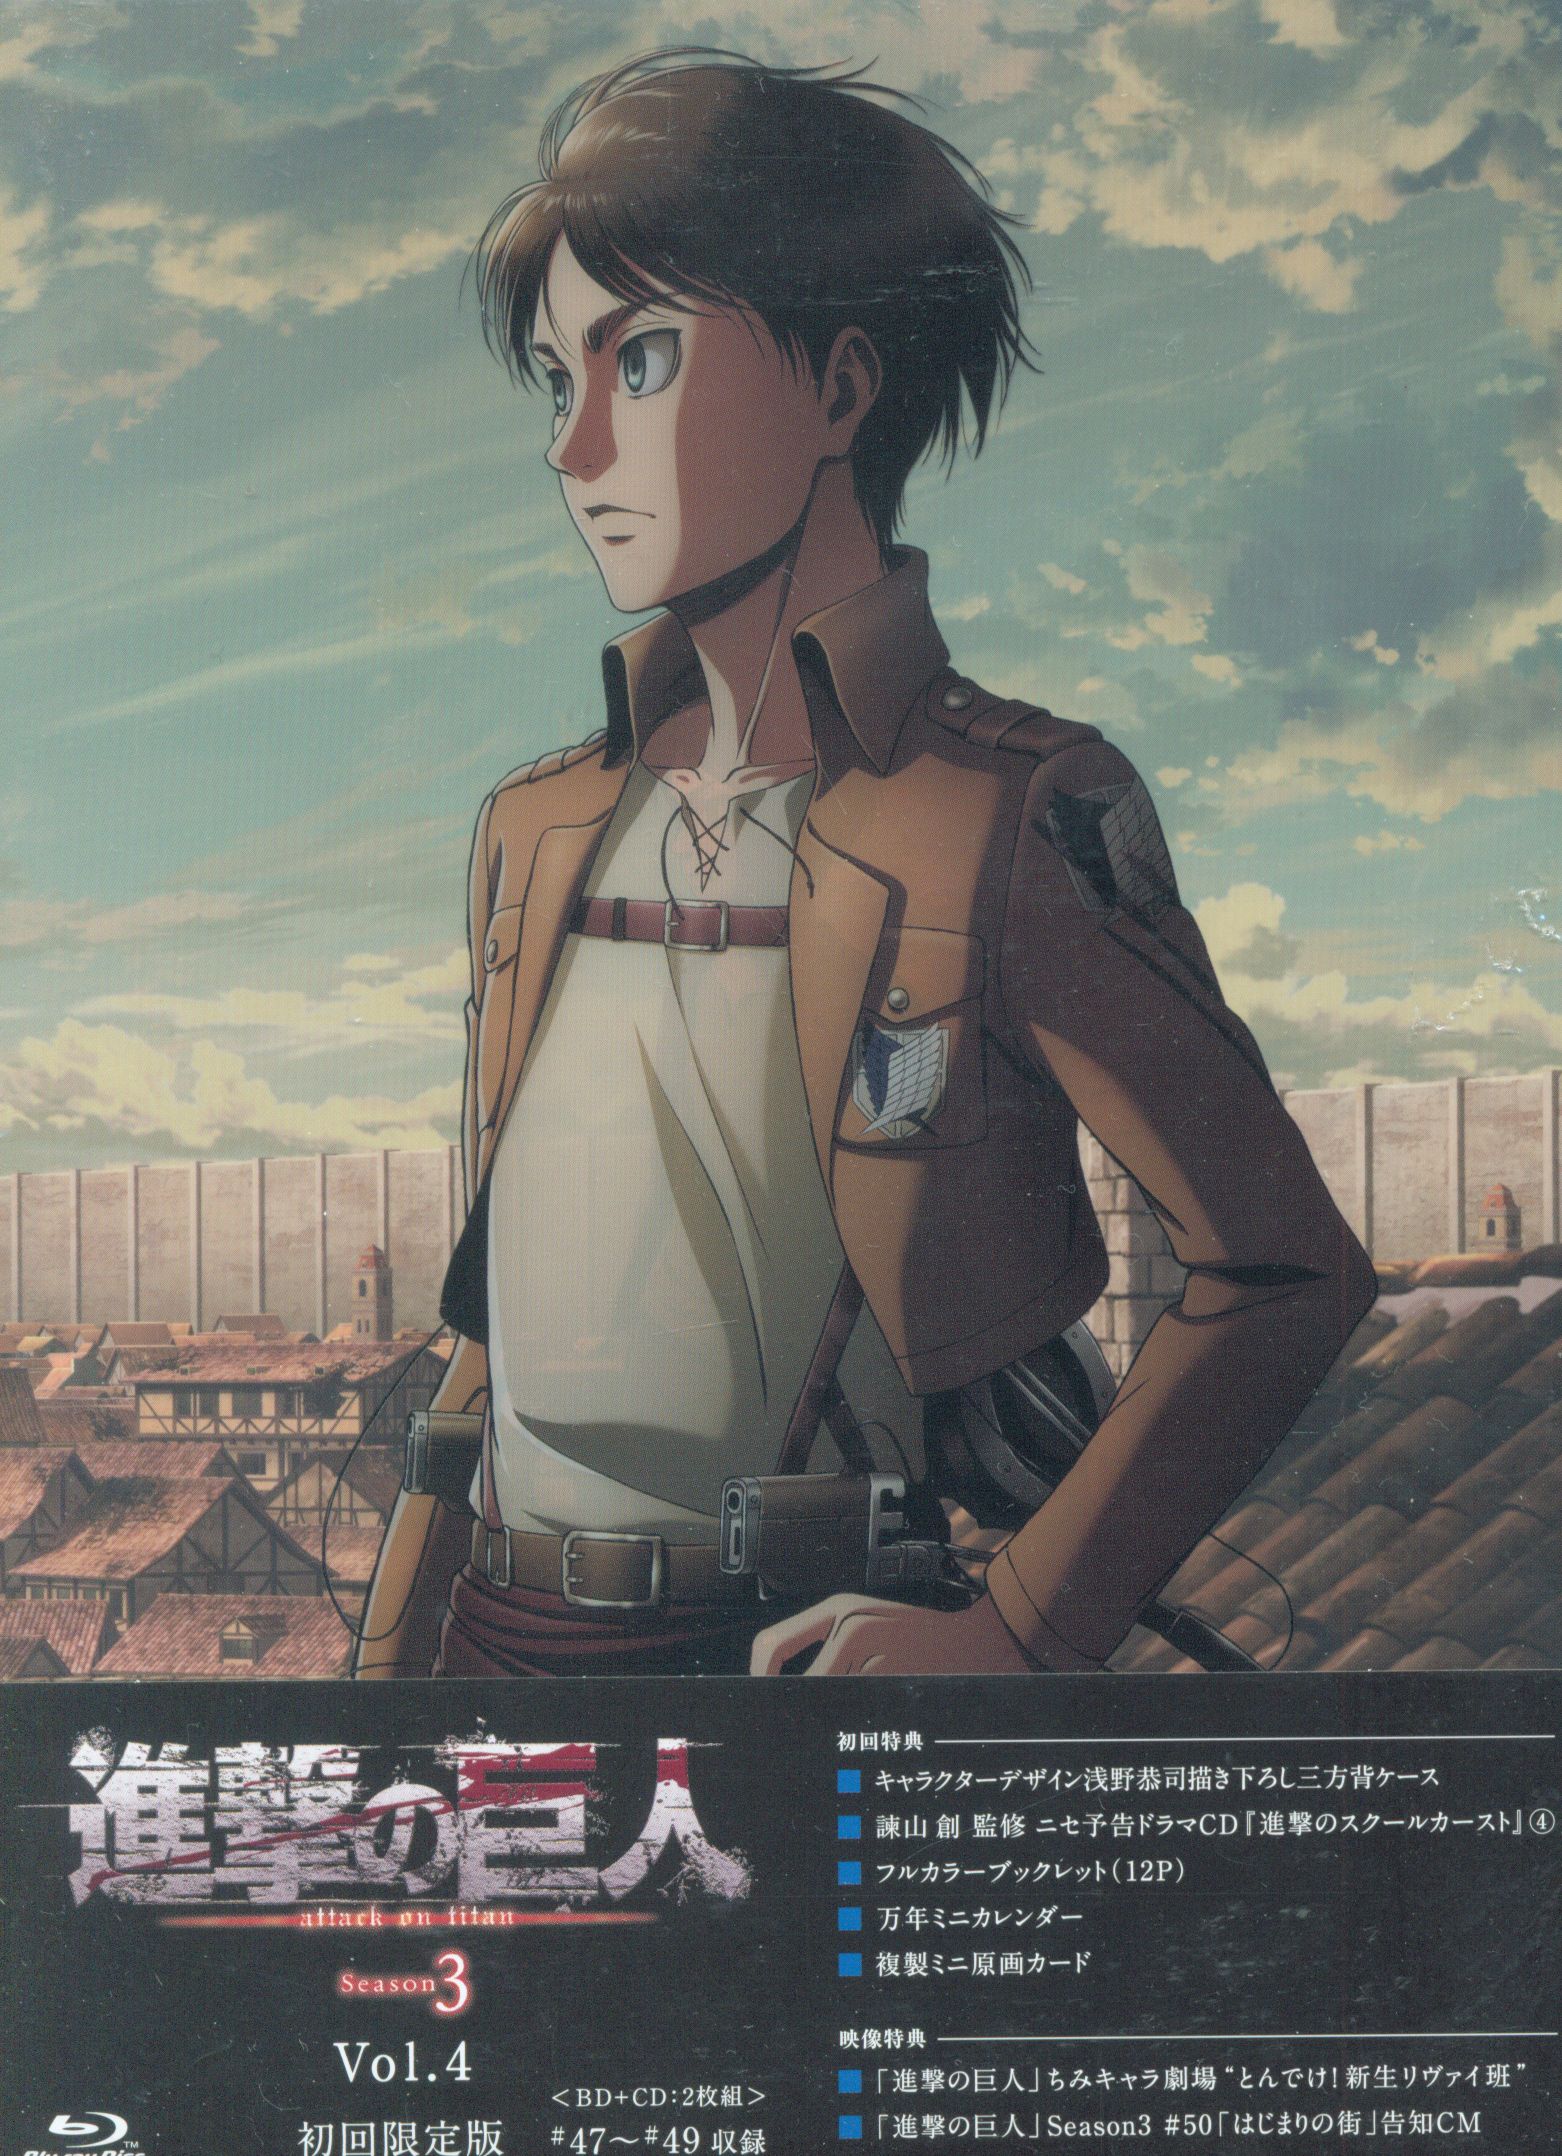 Attack on Titan Season 3 Part 2 Limited Edition Blu-ray & DVD Brand New  Sealed